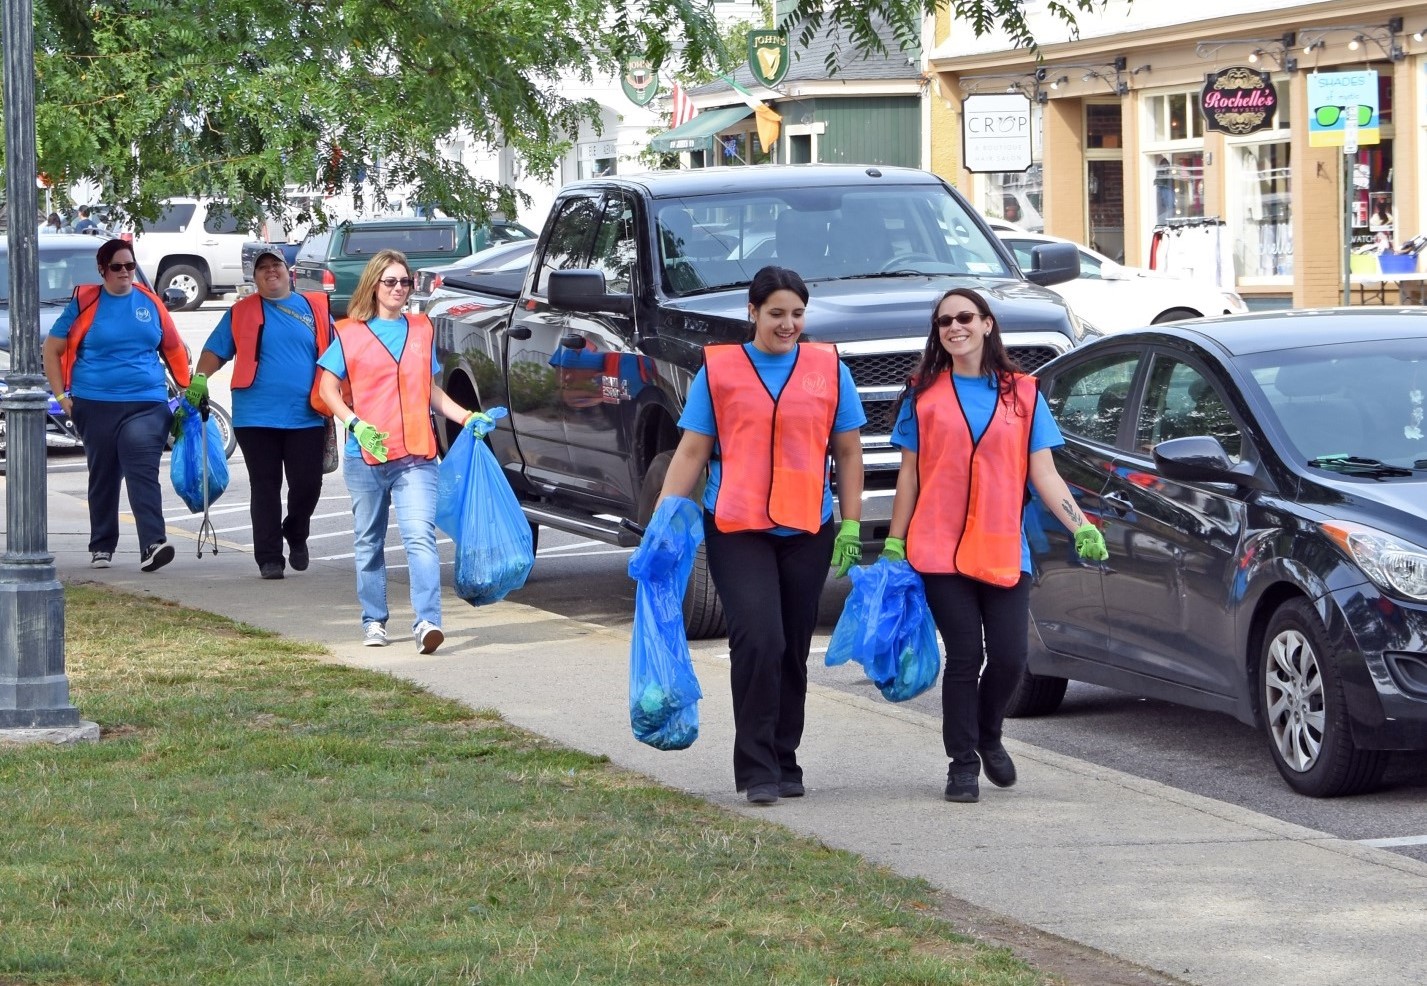 On September 22, Mystic Aquarium and volunteers joined together for the Mystic Wide Clean-Up—a town-wide, large-scale debris removal event. The event took place over an 8 hour period at different locations around Mystic. During the event, 444 pounds of debris were collected by over 100 volunteers.